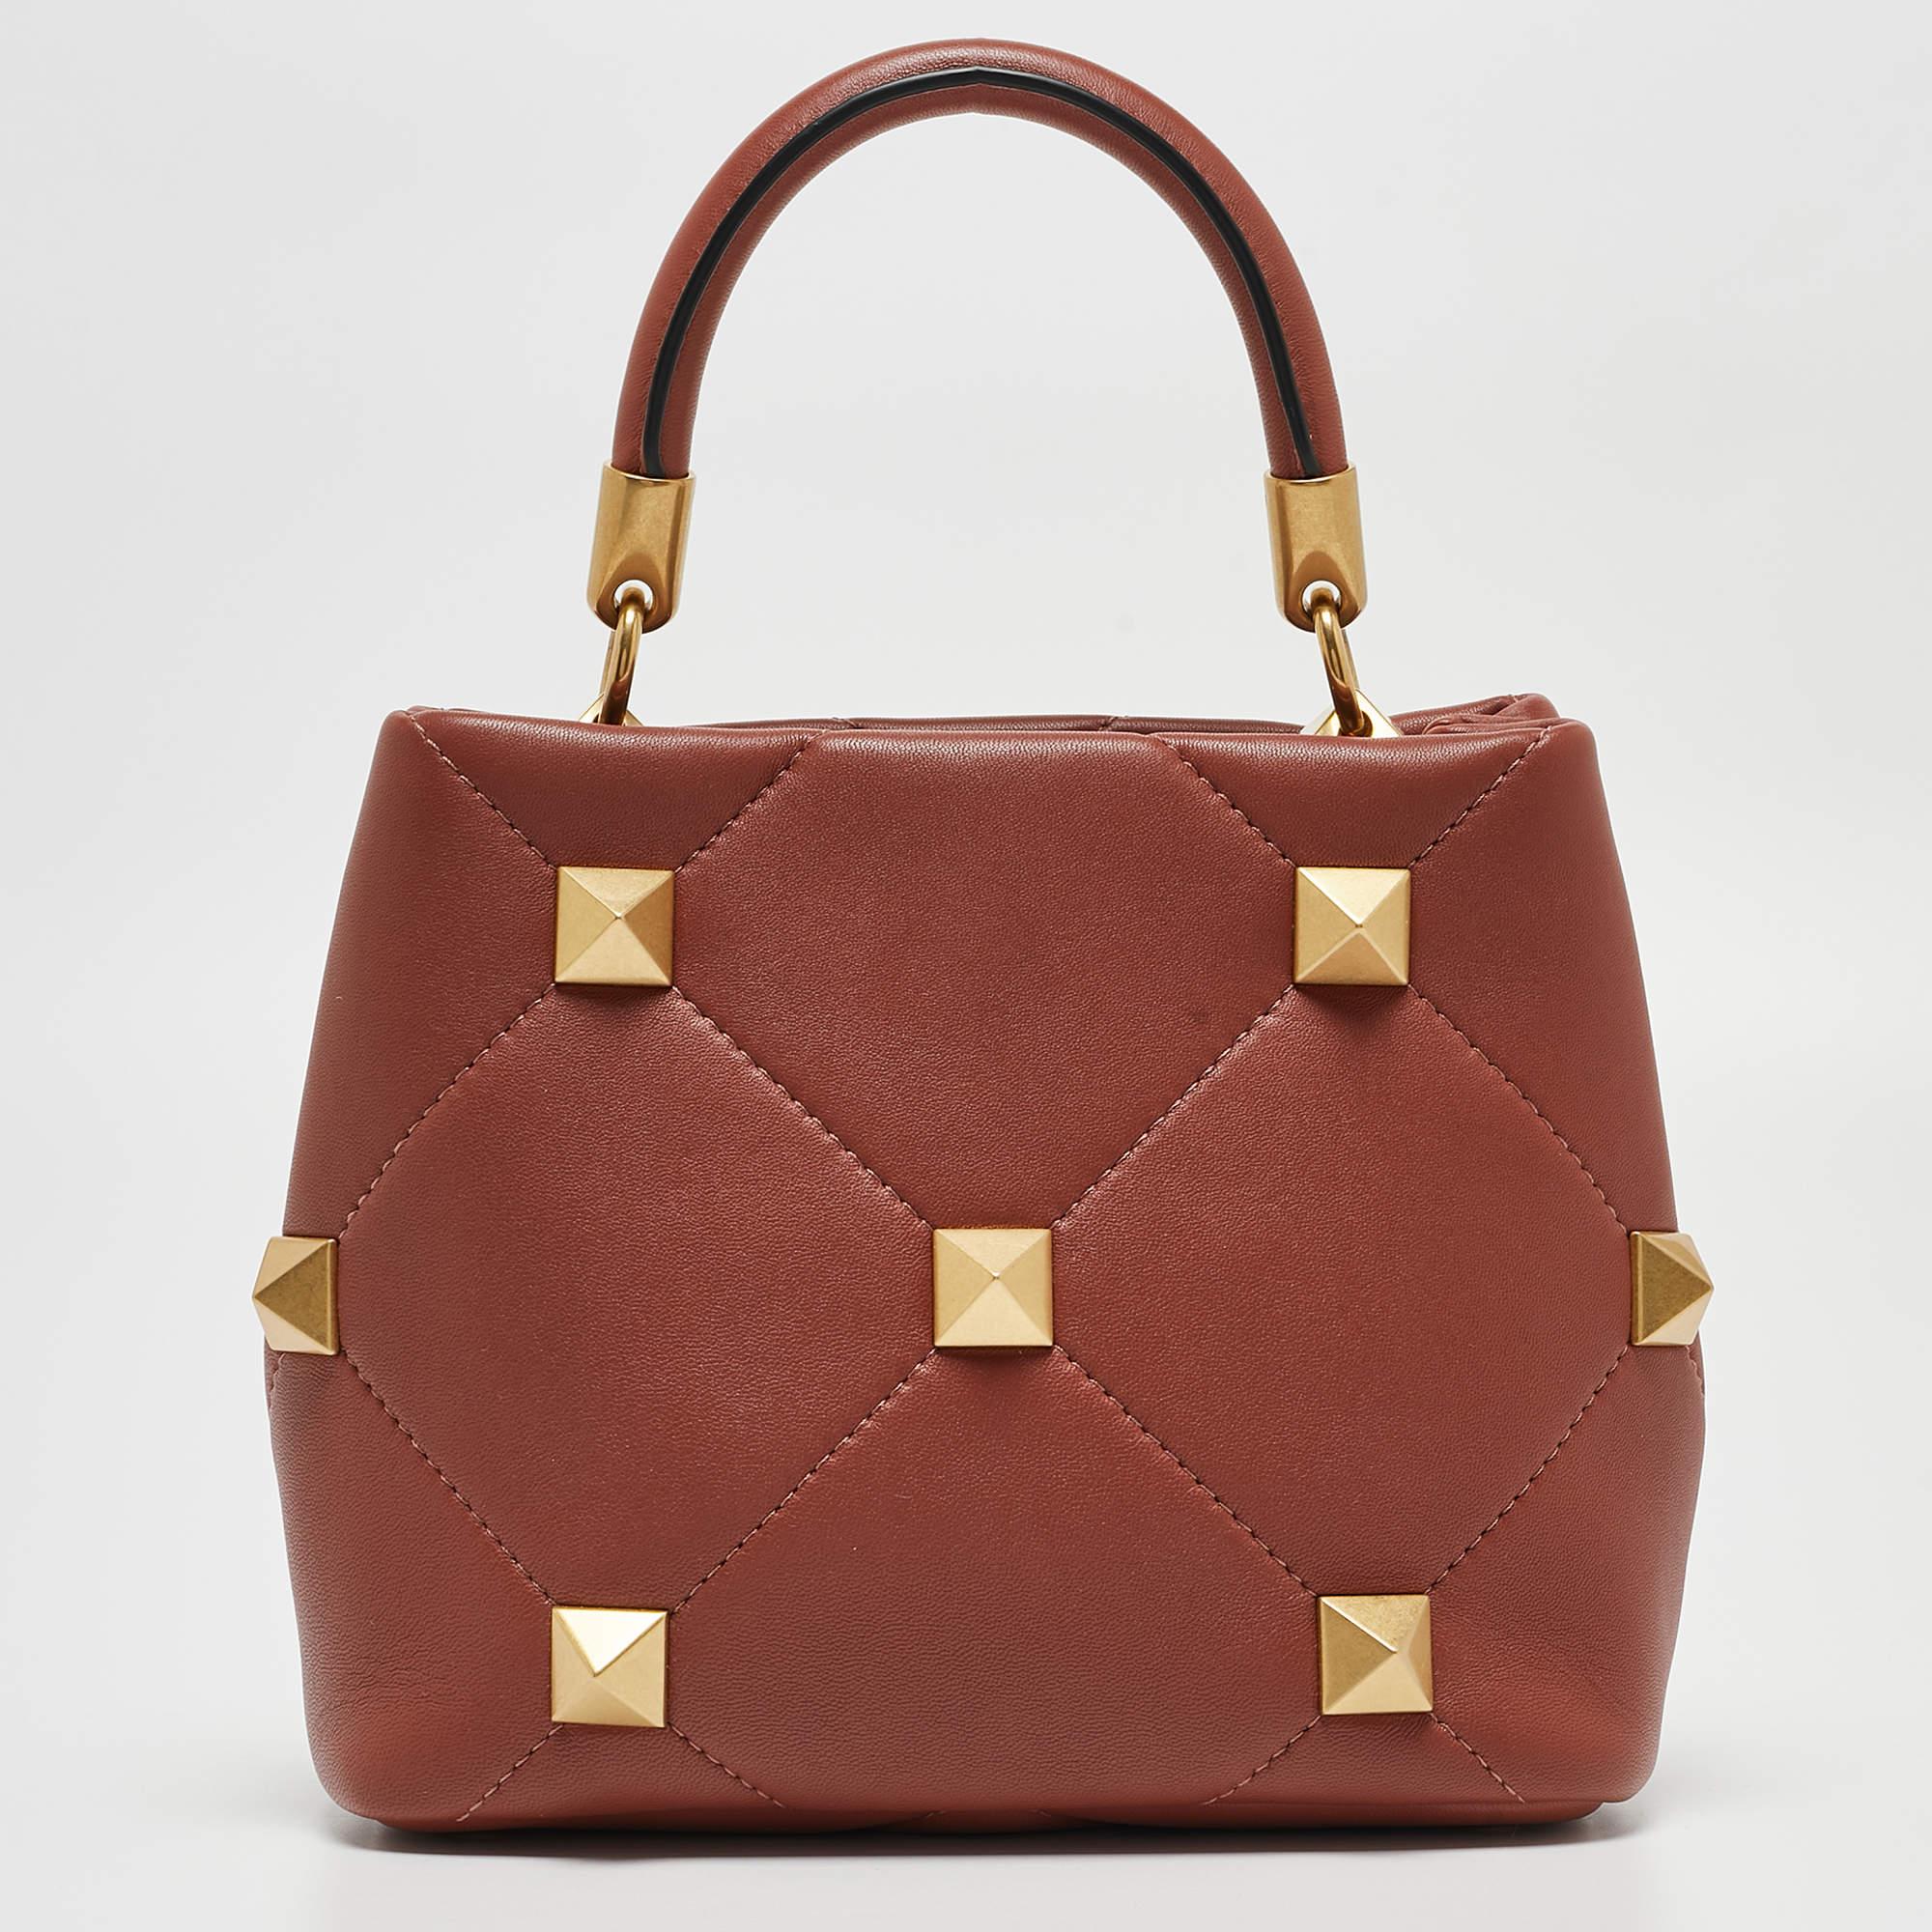 The Valentino top handle bag epitomizes timeless elegance. Crafted from luxurious chestnut brown leather, and adorned with exquisite Roman stud detailing, this sophisticated accessory seamlessly blends classic design with modern allure. Elevate your